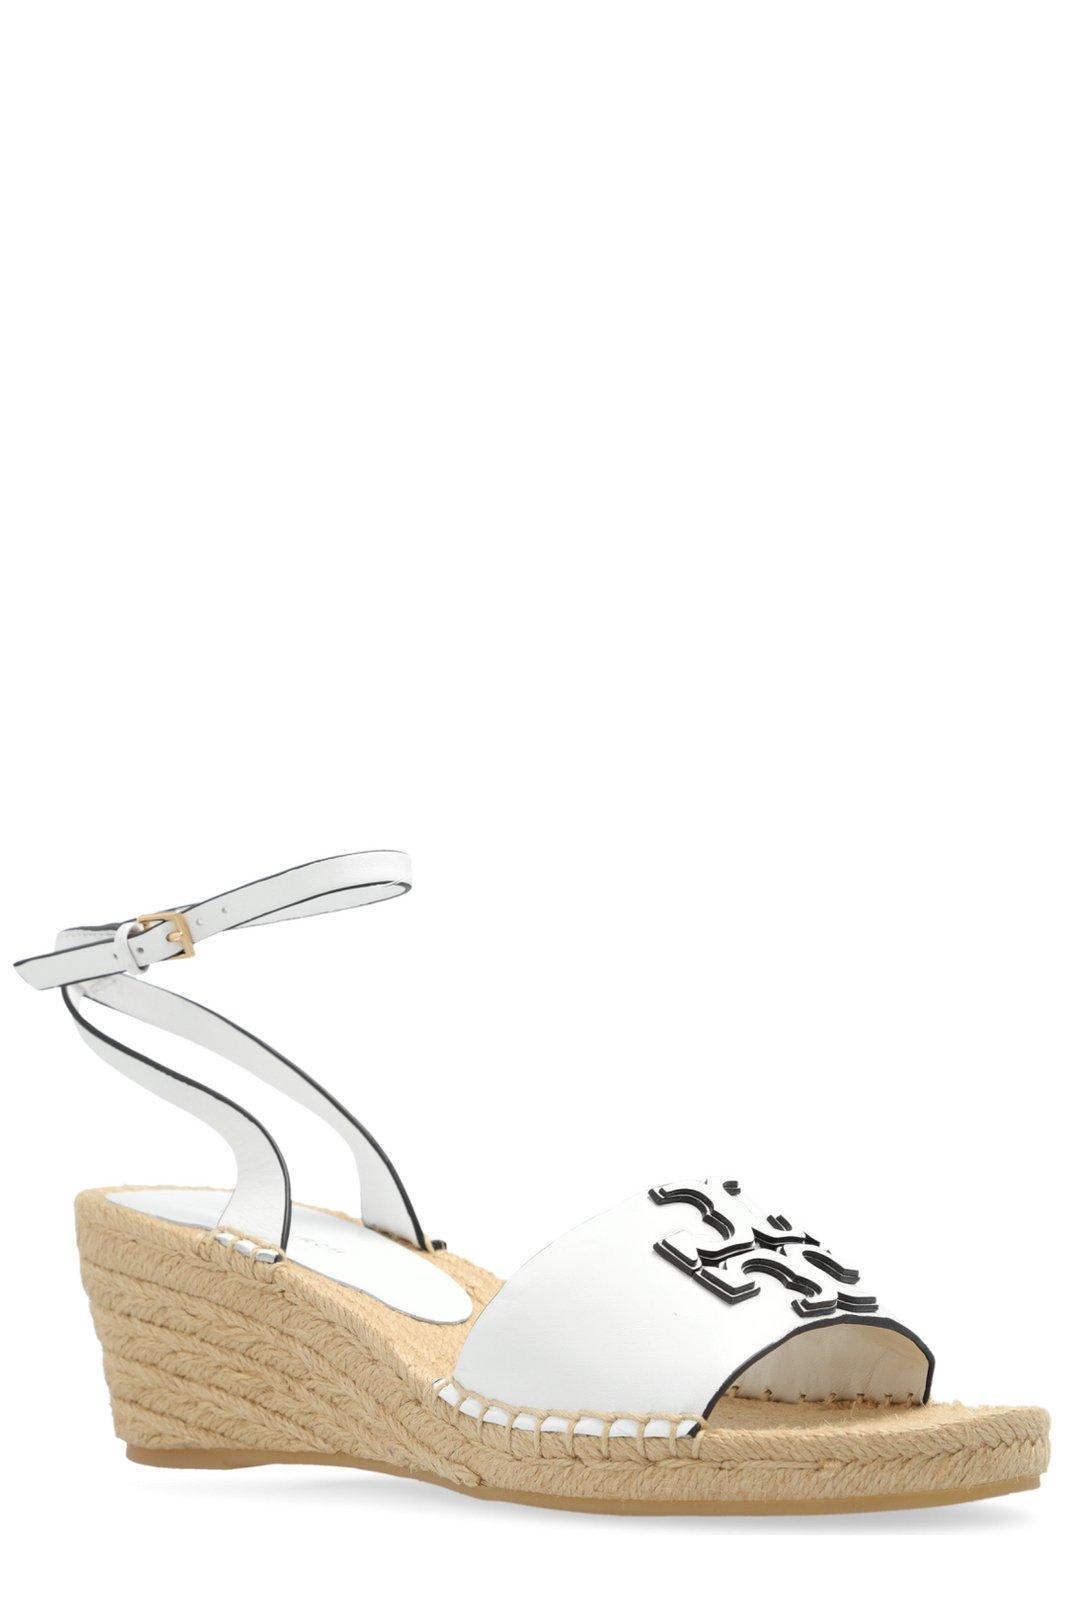 Shop Tory Burch Double-t Wedge Espadrilles In White